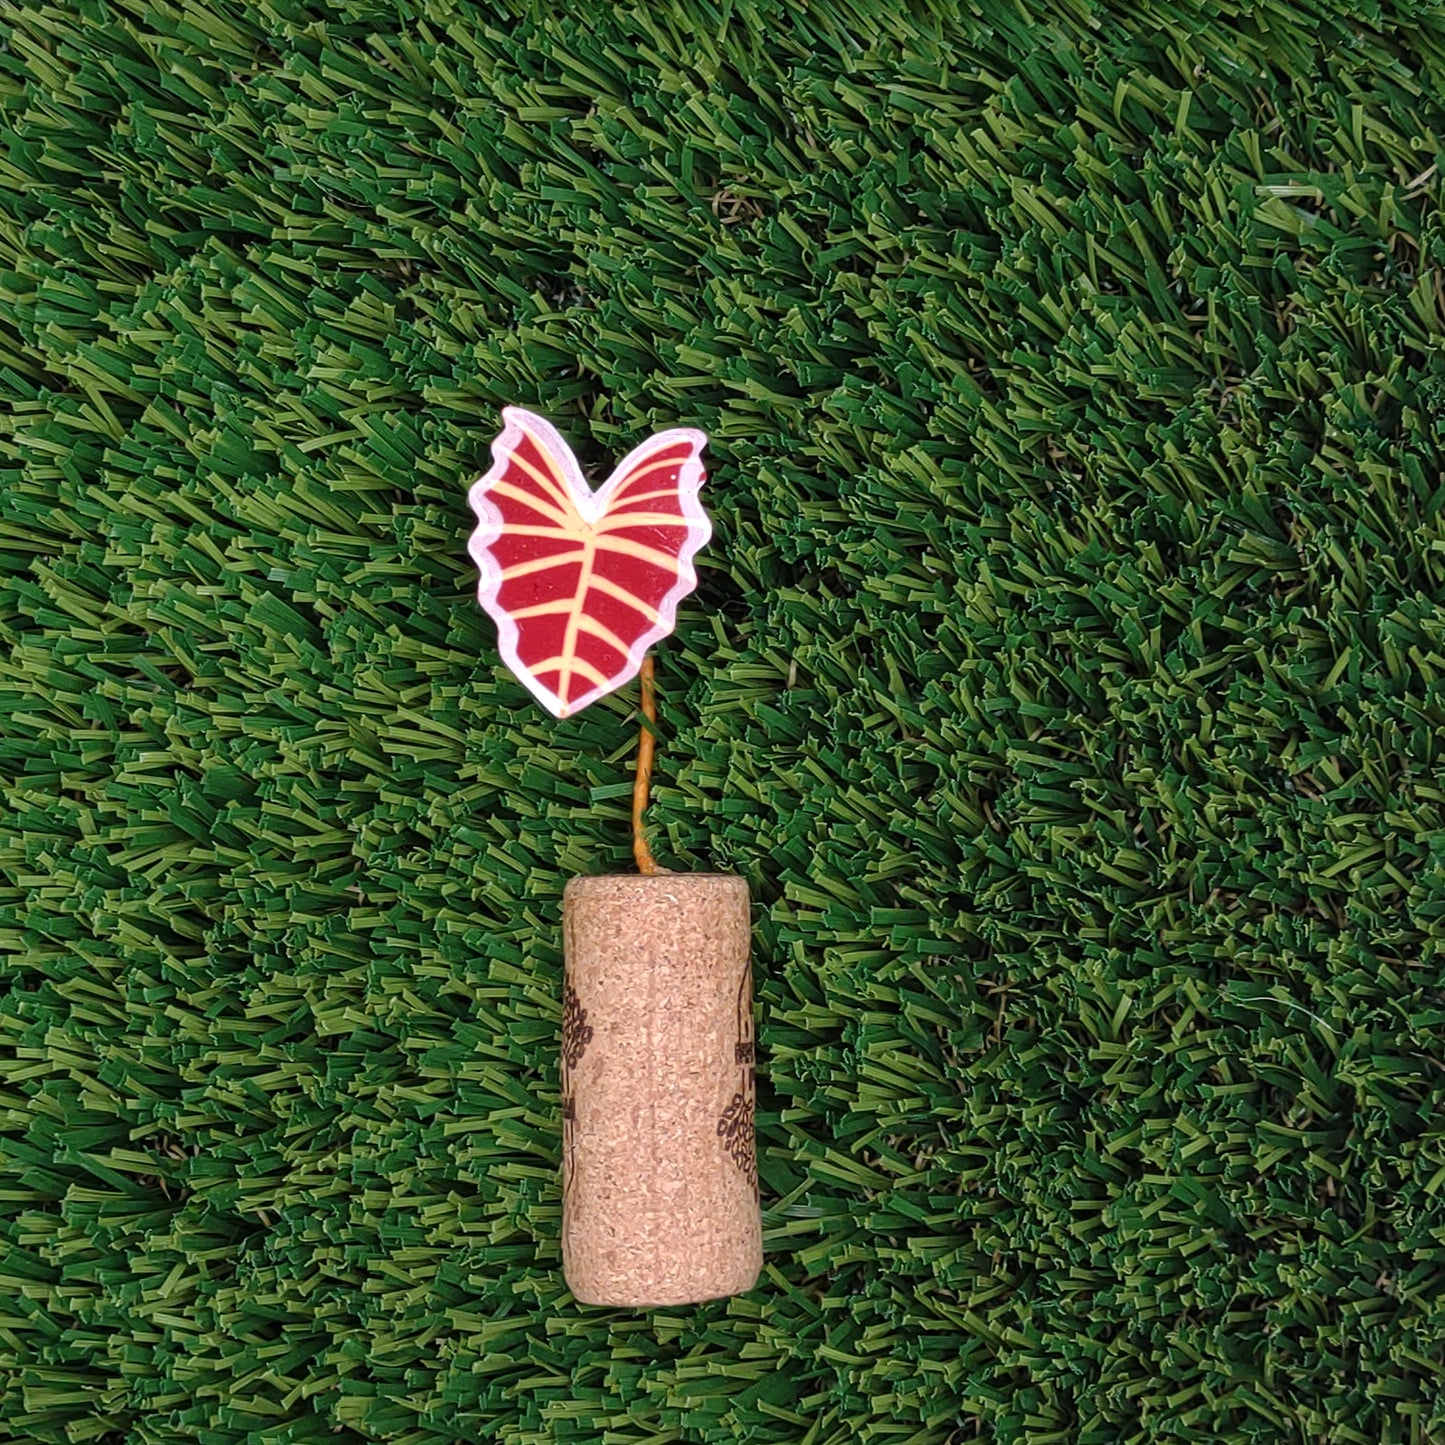 Tiny Magical Paper House Plant in Upcycled Cork - DECORATIVE MAGNET